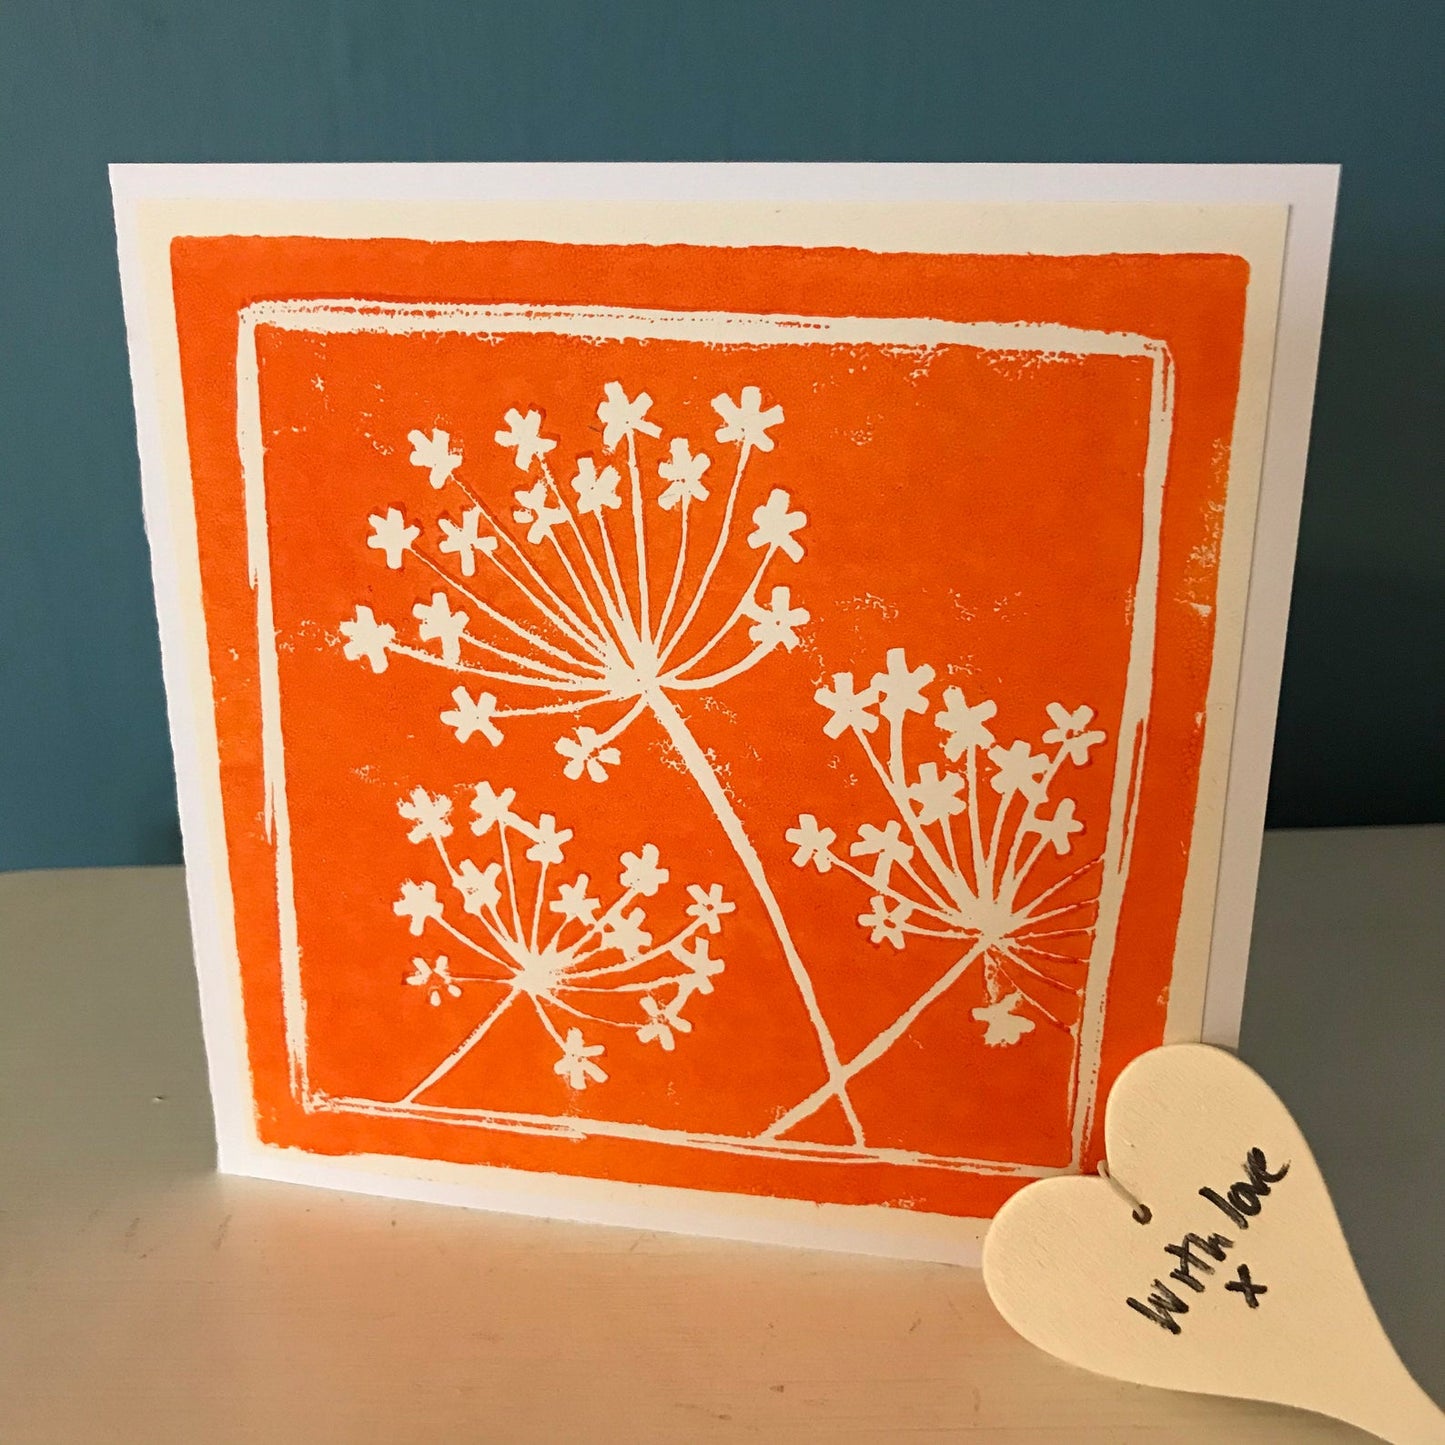 Hand printed Lino cut greeting card, single colour.  Seed head design.  Blank inside for your own special message.